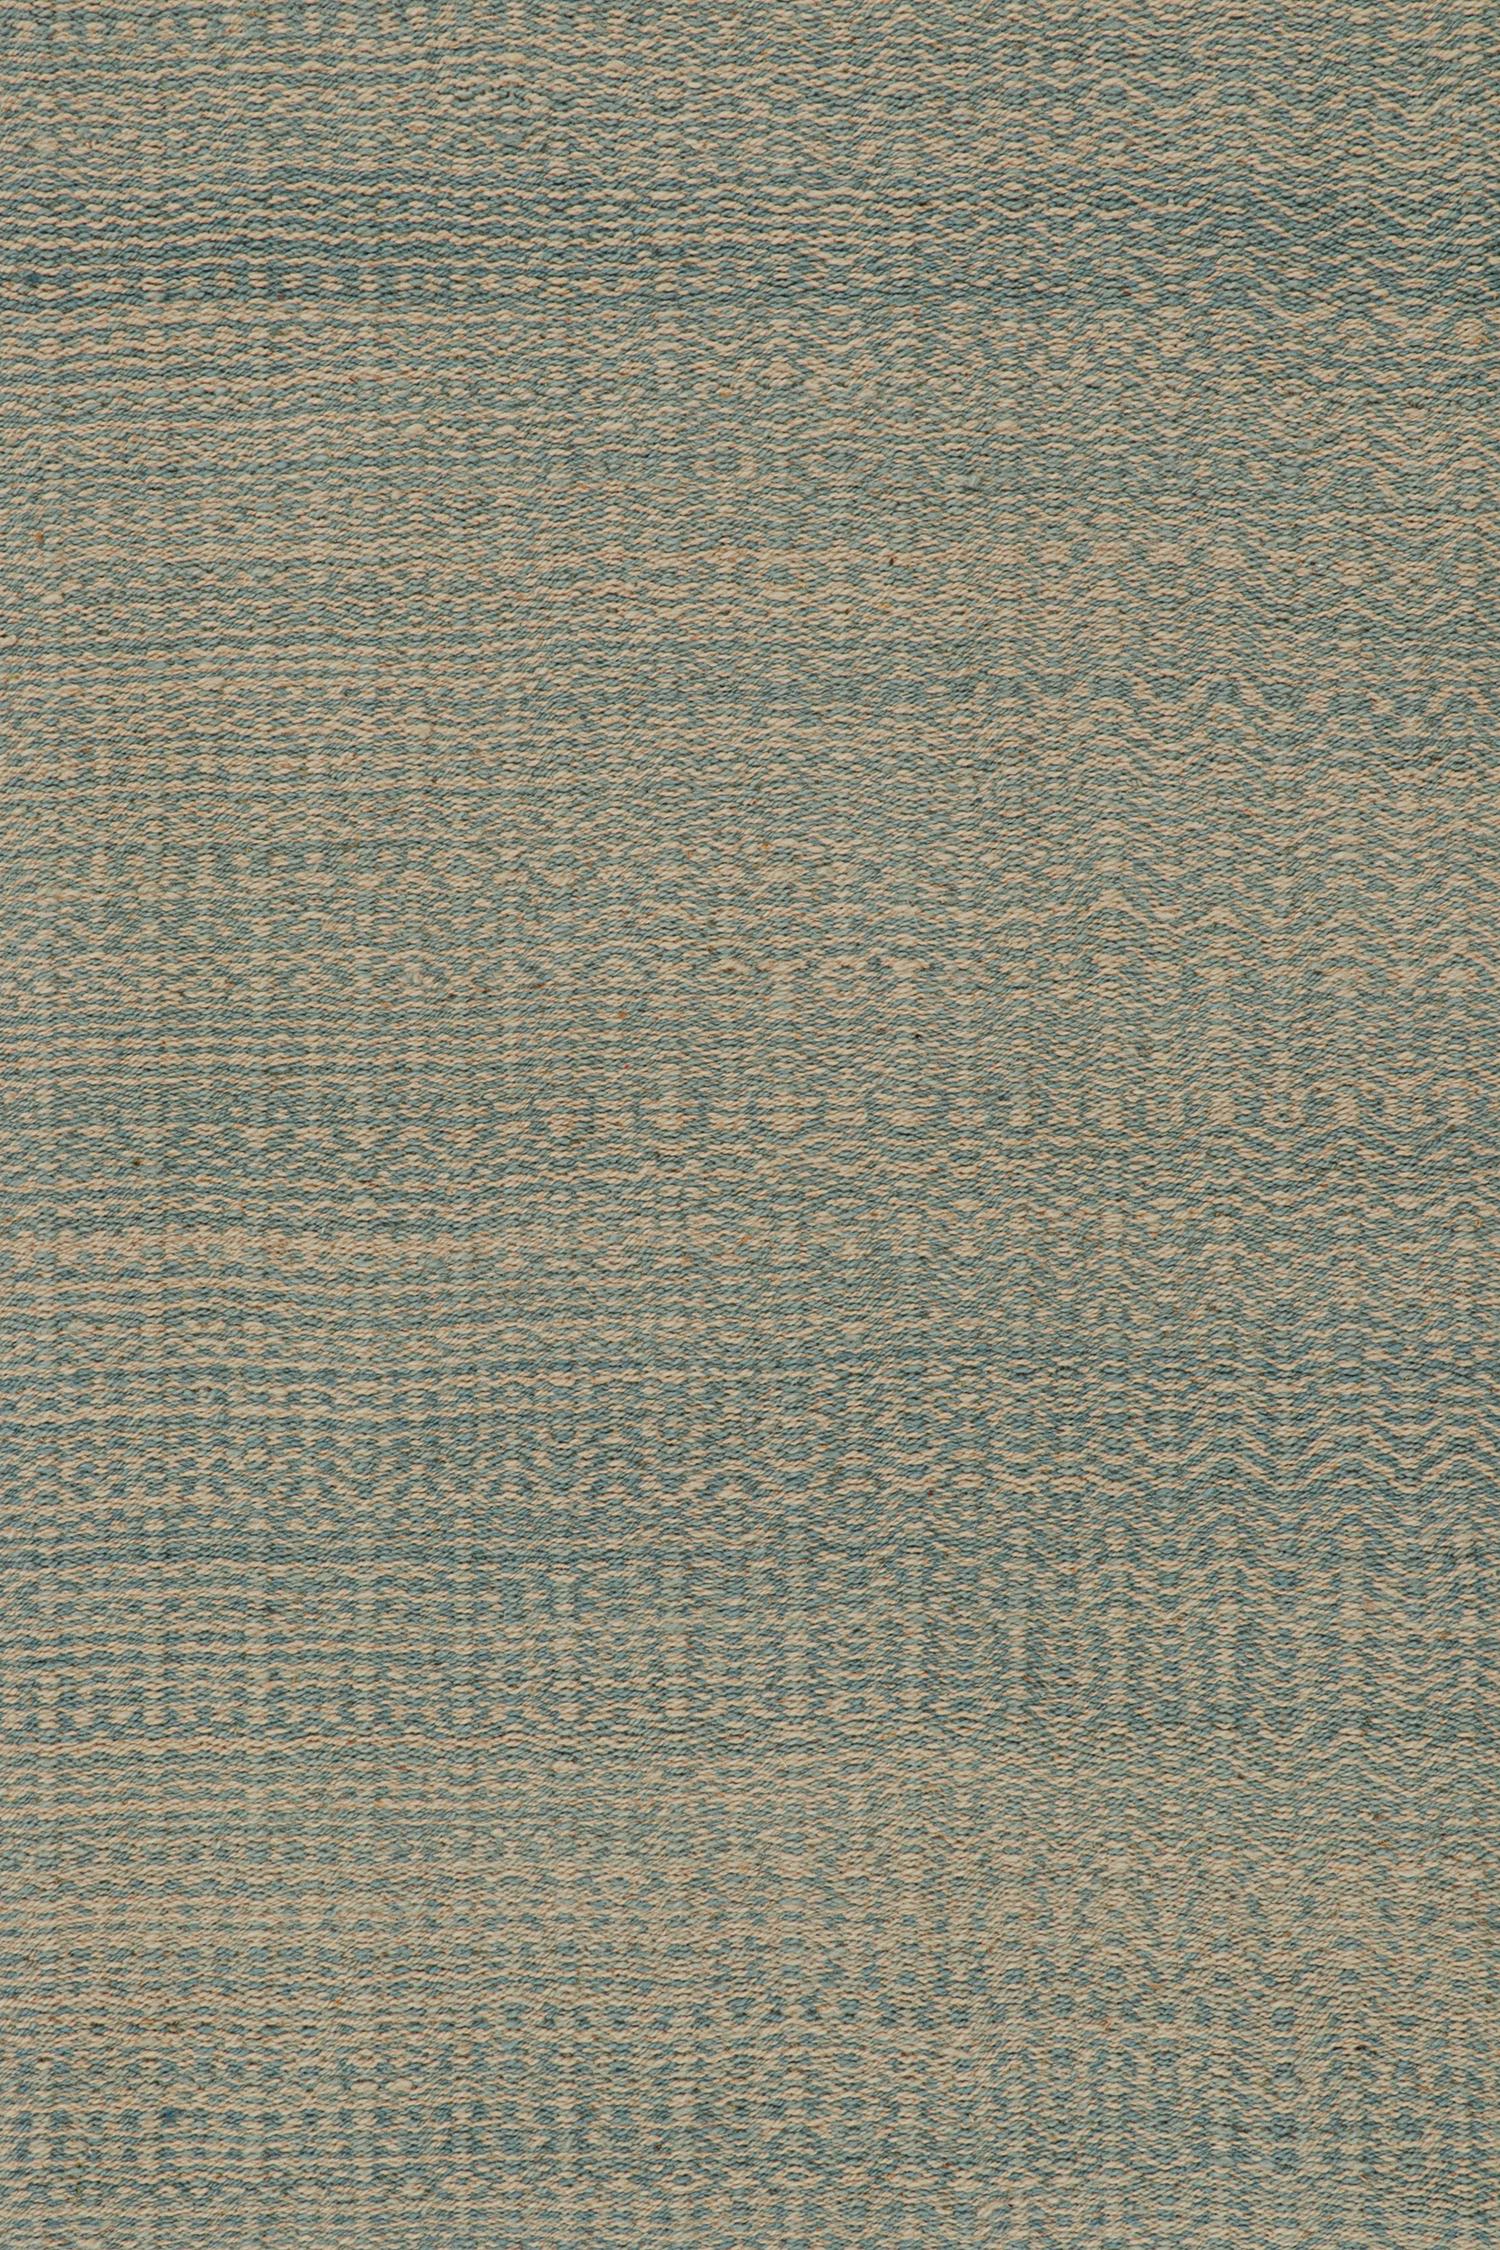 Rug & Kilim’s Contemporary Persian Kilim in Blue and Beige Stripes In New Condition For Sale In Long Island City, NY